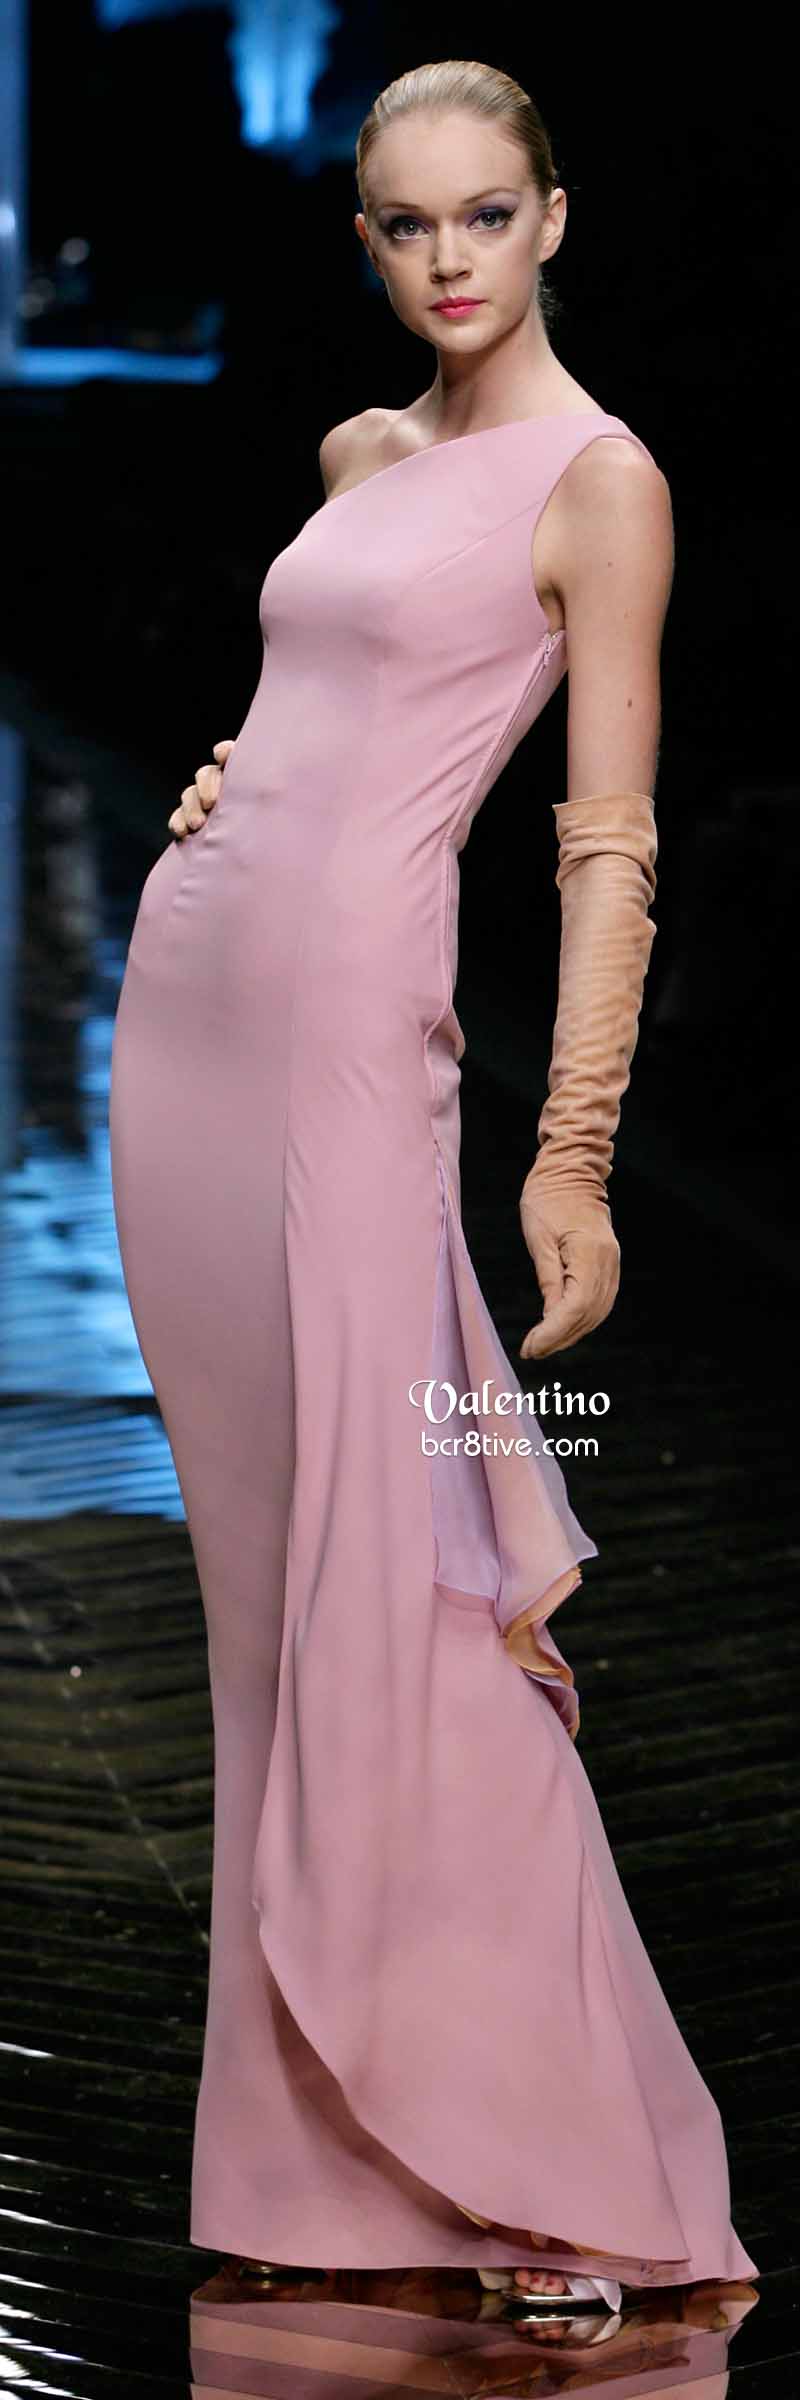 Valentino One Shoulder Dusty Rose Evening Gown